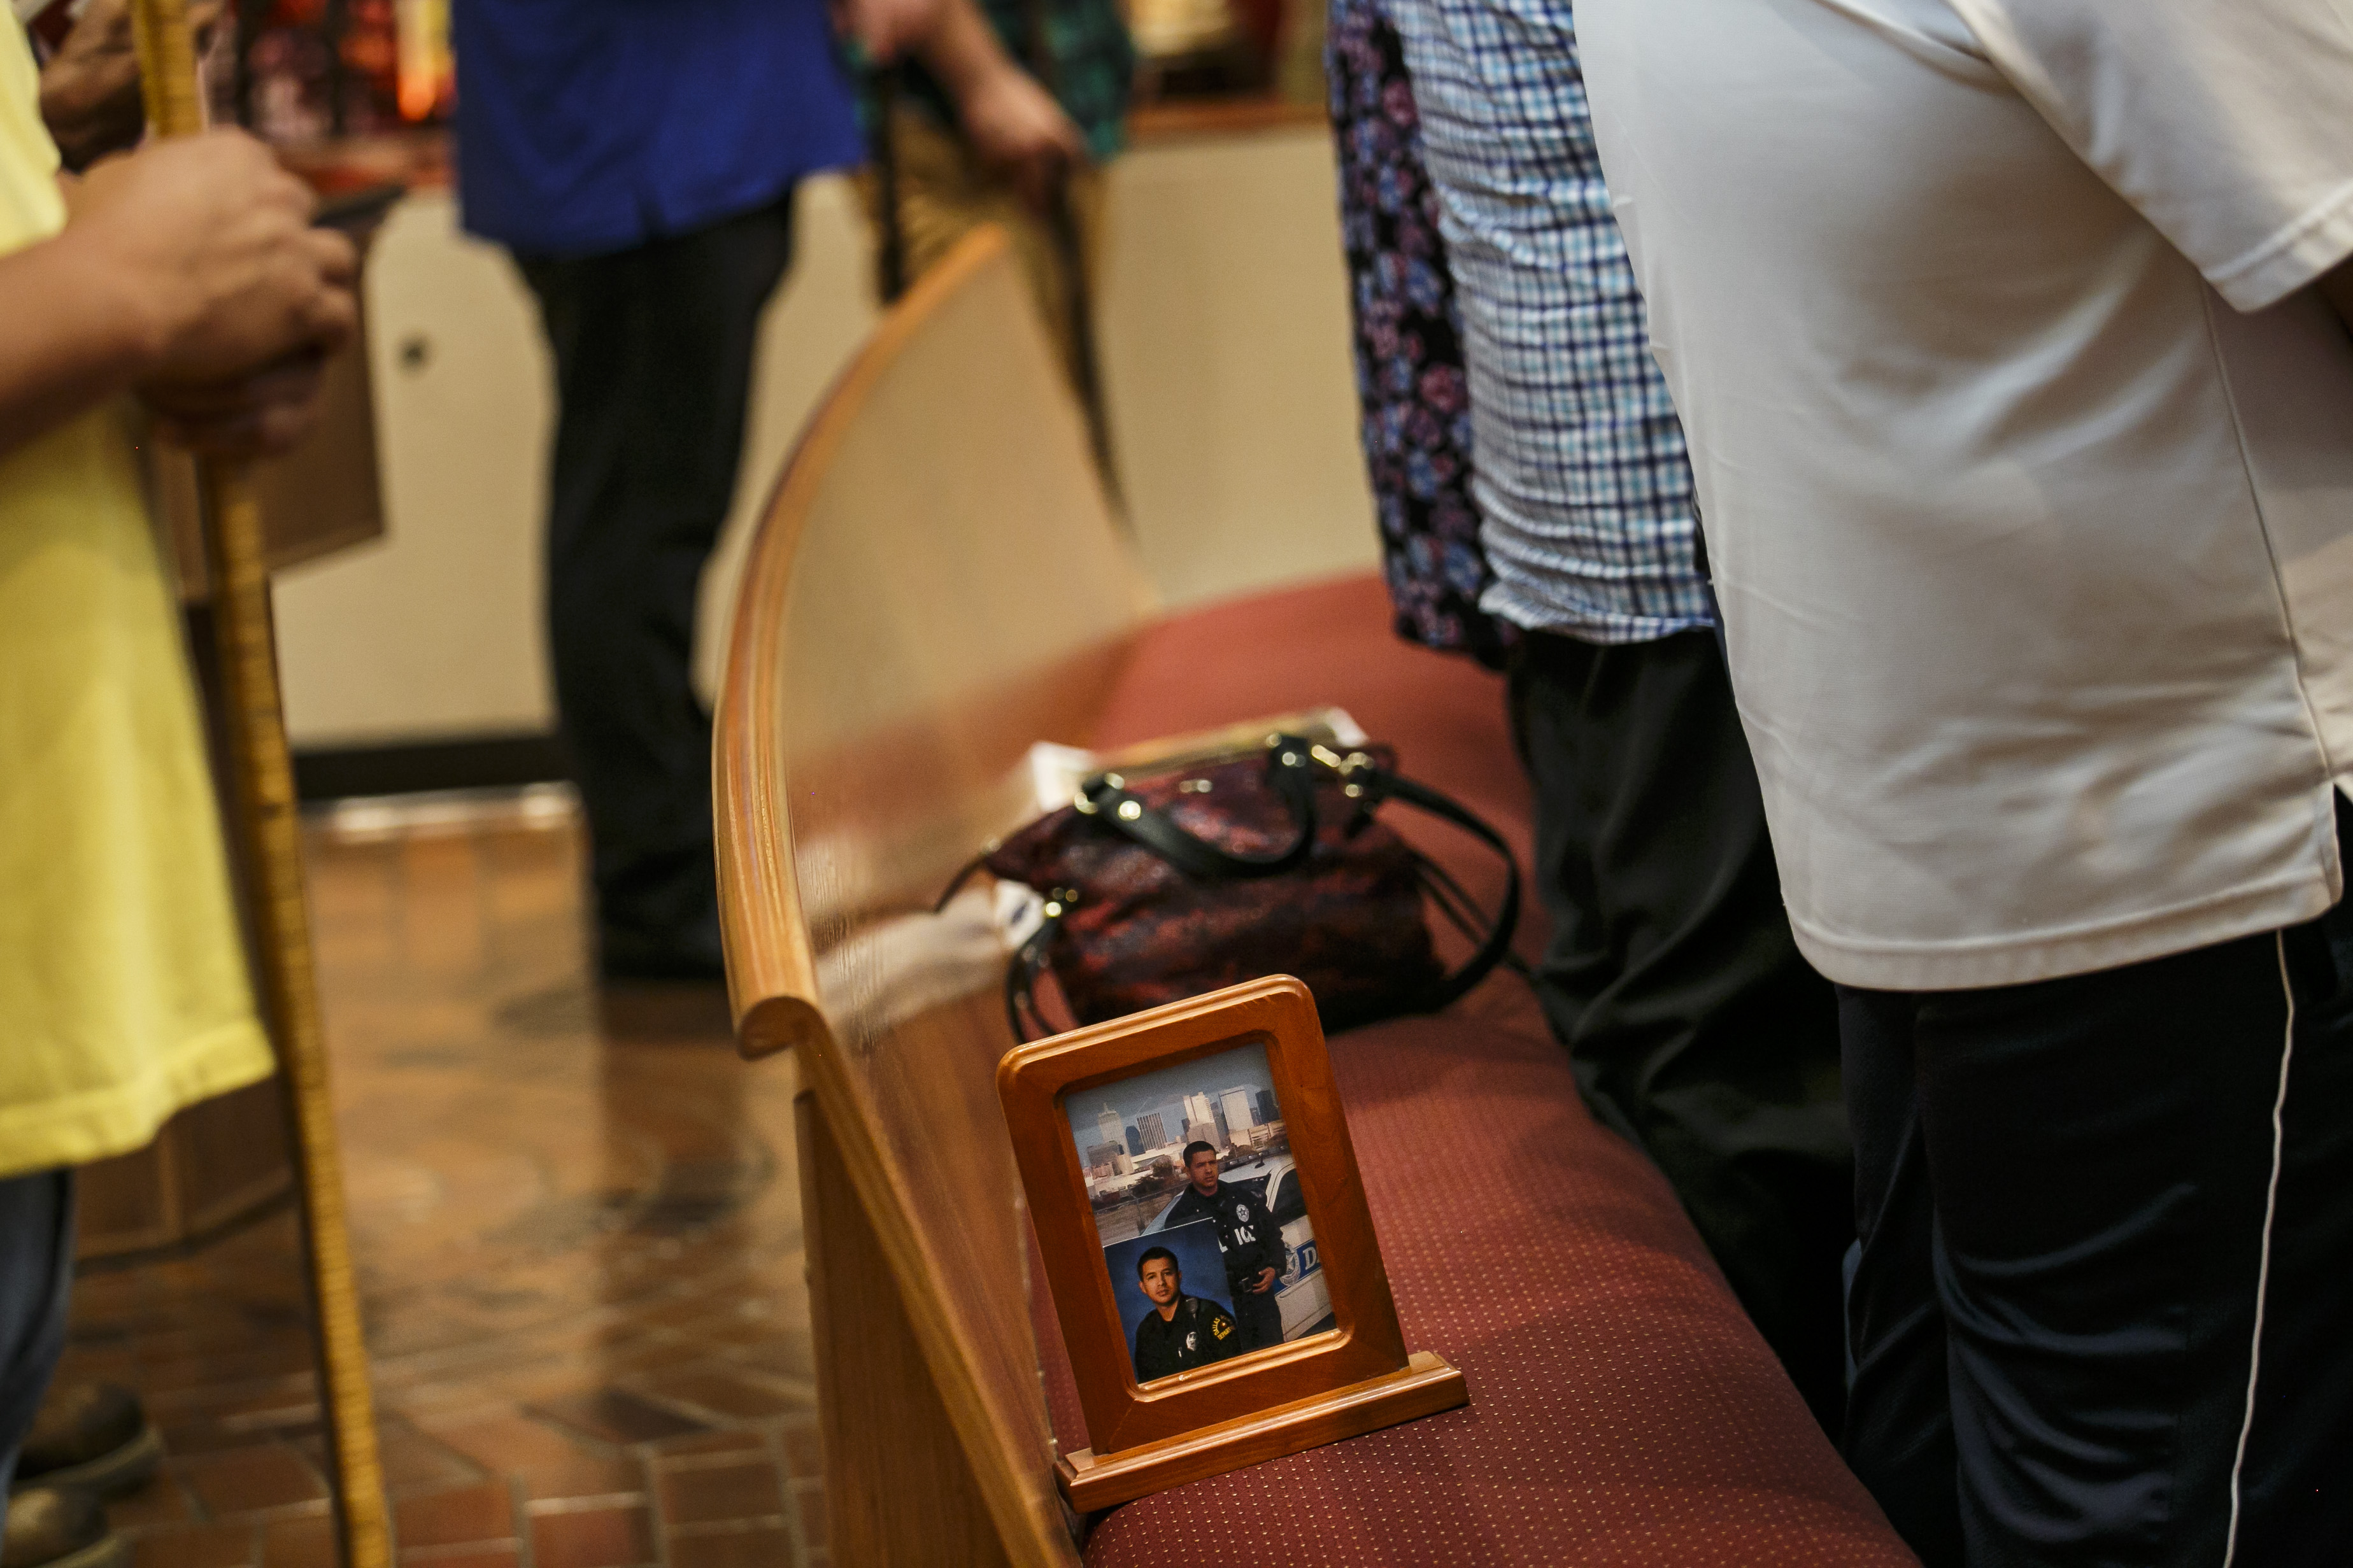 A picture frame with two portraits of slain police officer Patrick Zamarripa, sits on the pew as family members stand to pray during Sunday mass at All Saints Catholic Church, in Dallas, Texas, on July 10, 2016. (Marcus Yam&mdash;LA Times via Getty Images)